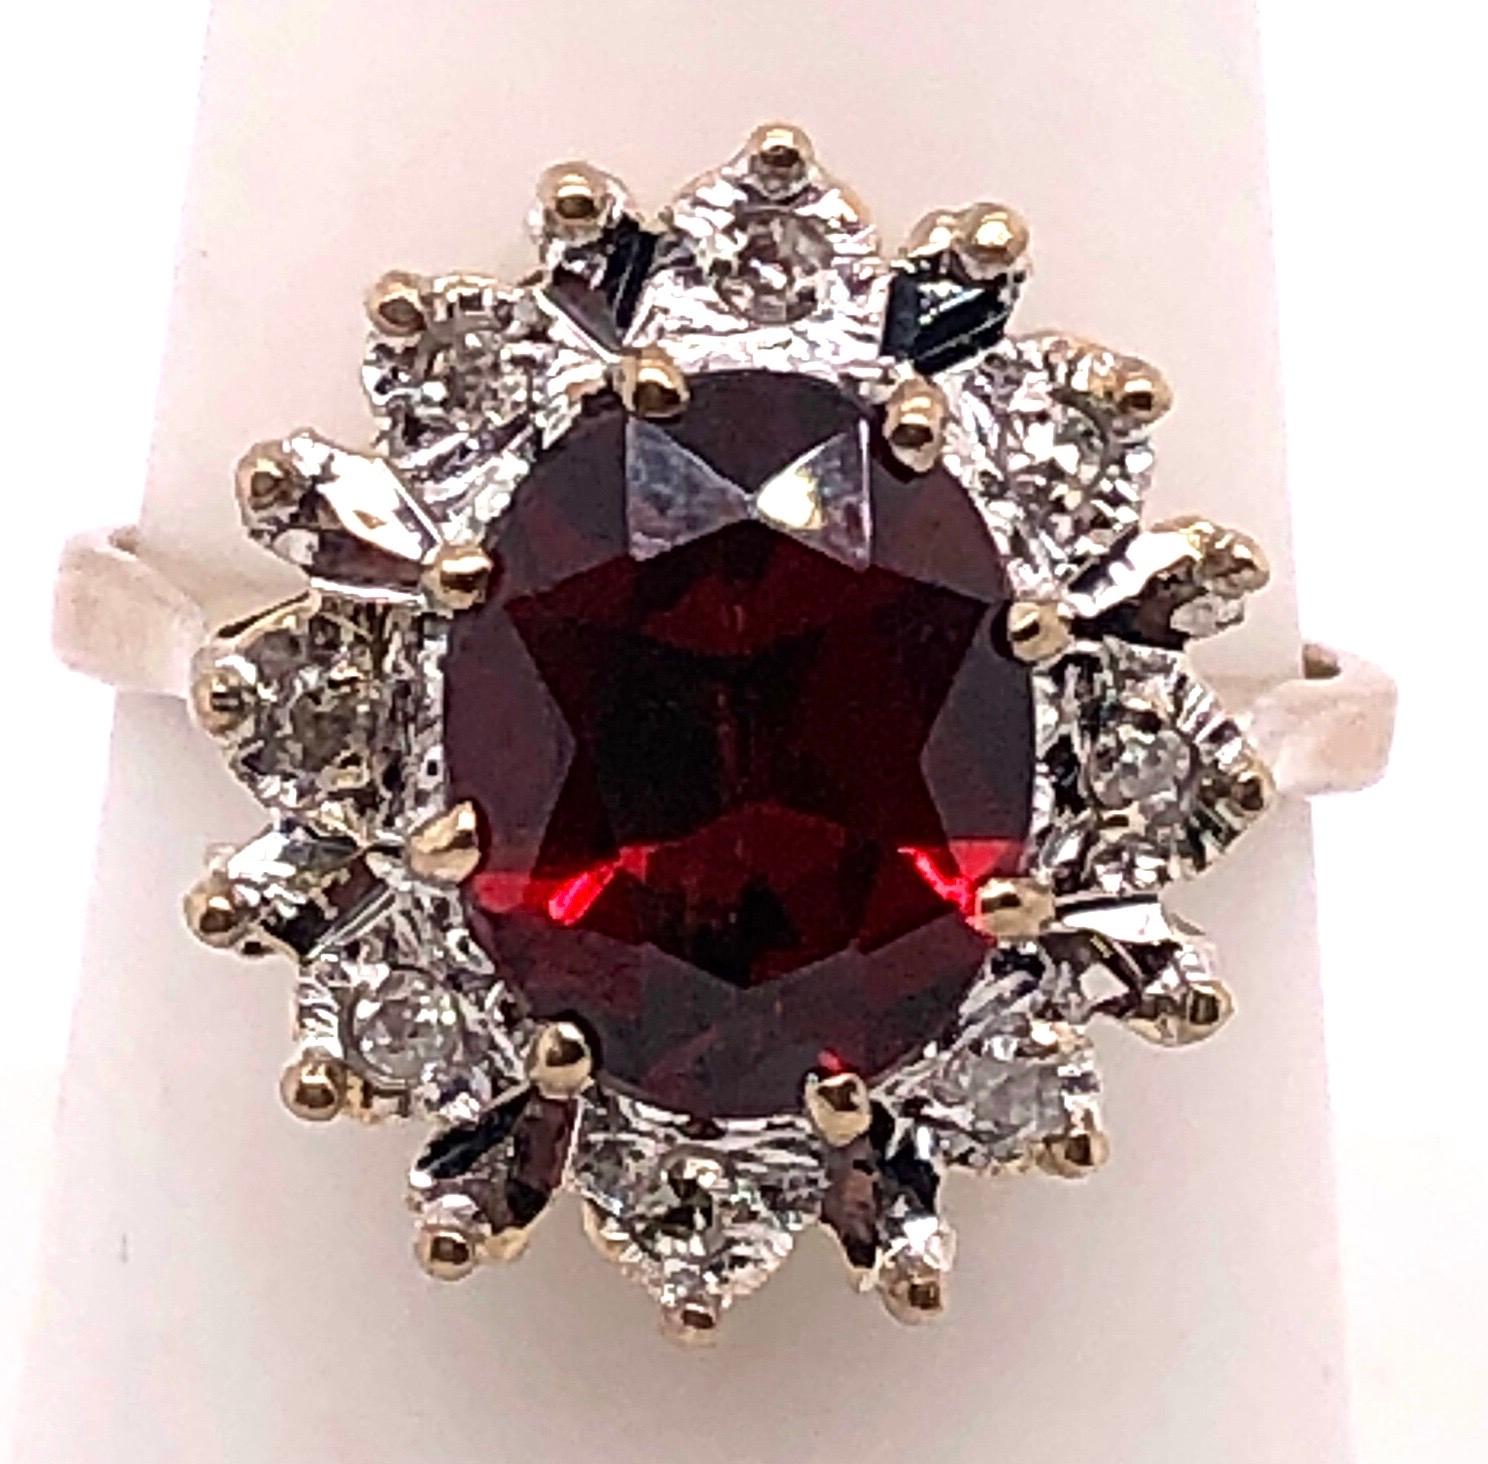 14 Karat Yellow Gold Fashion Ring with Ruby and Diamonds,
Size 7.25
3.9 grams total weight.